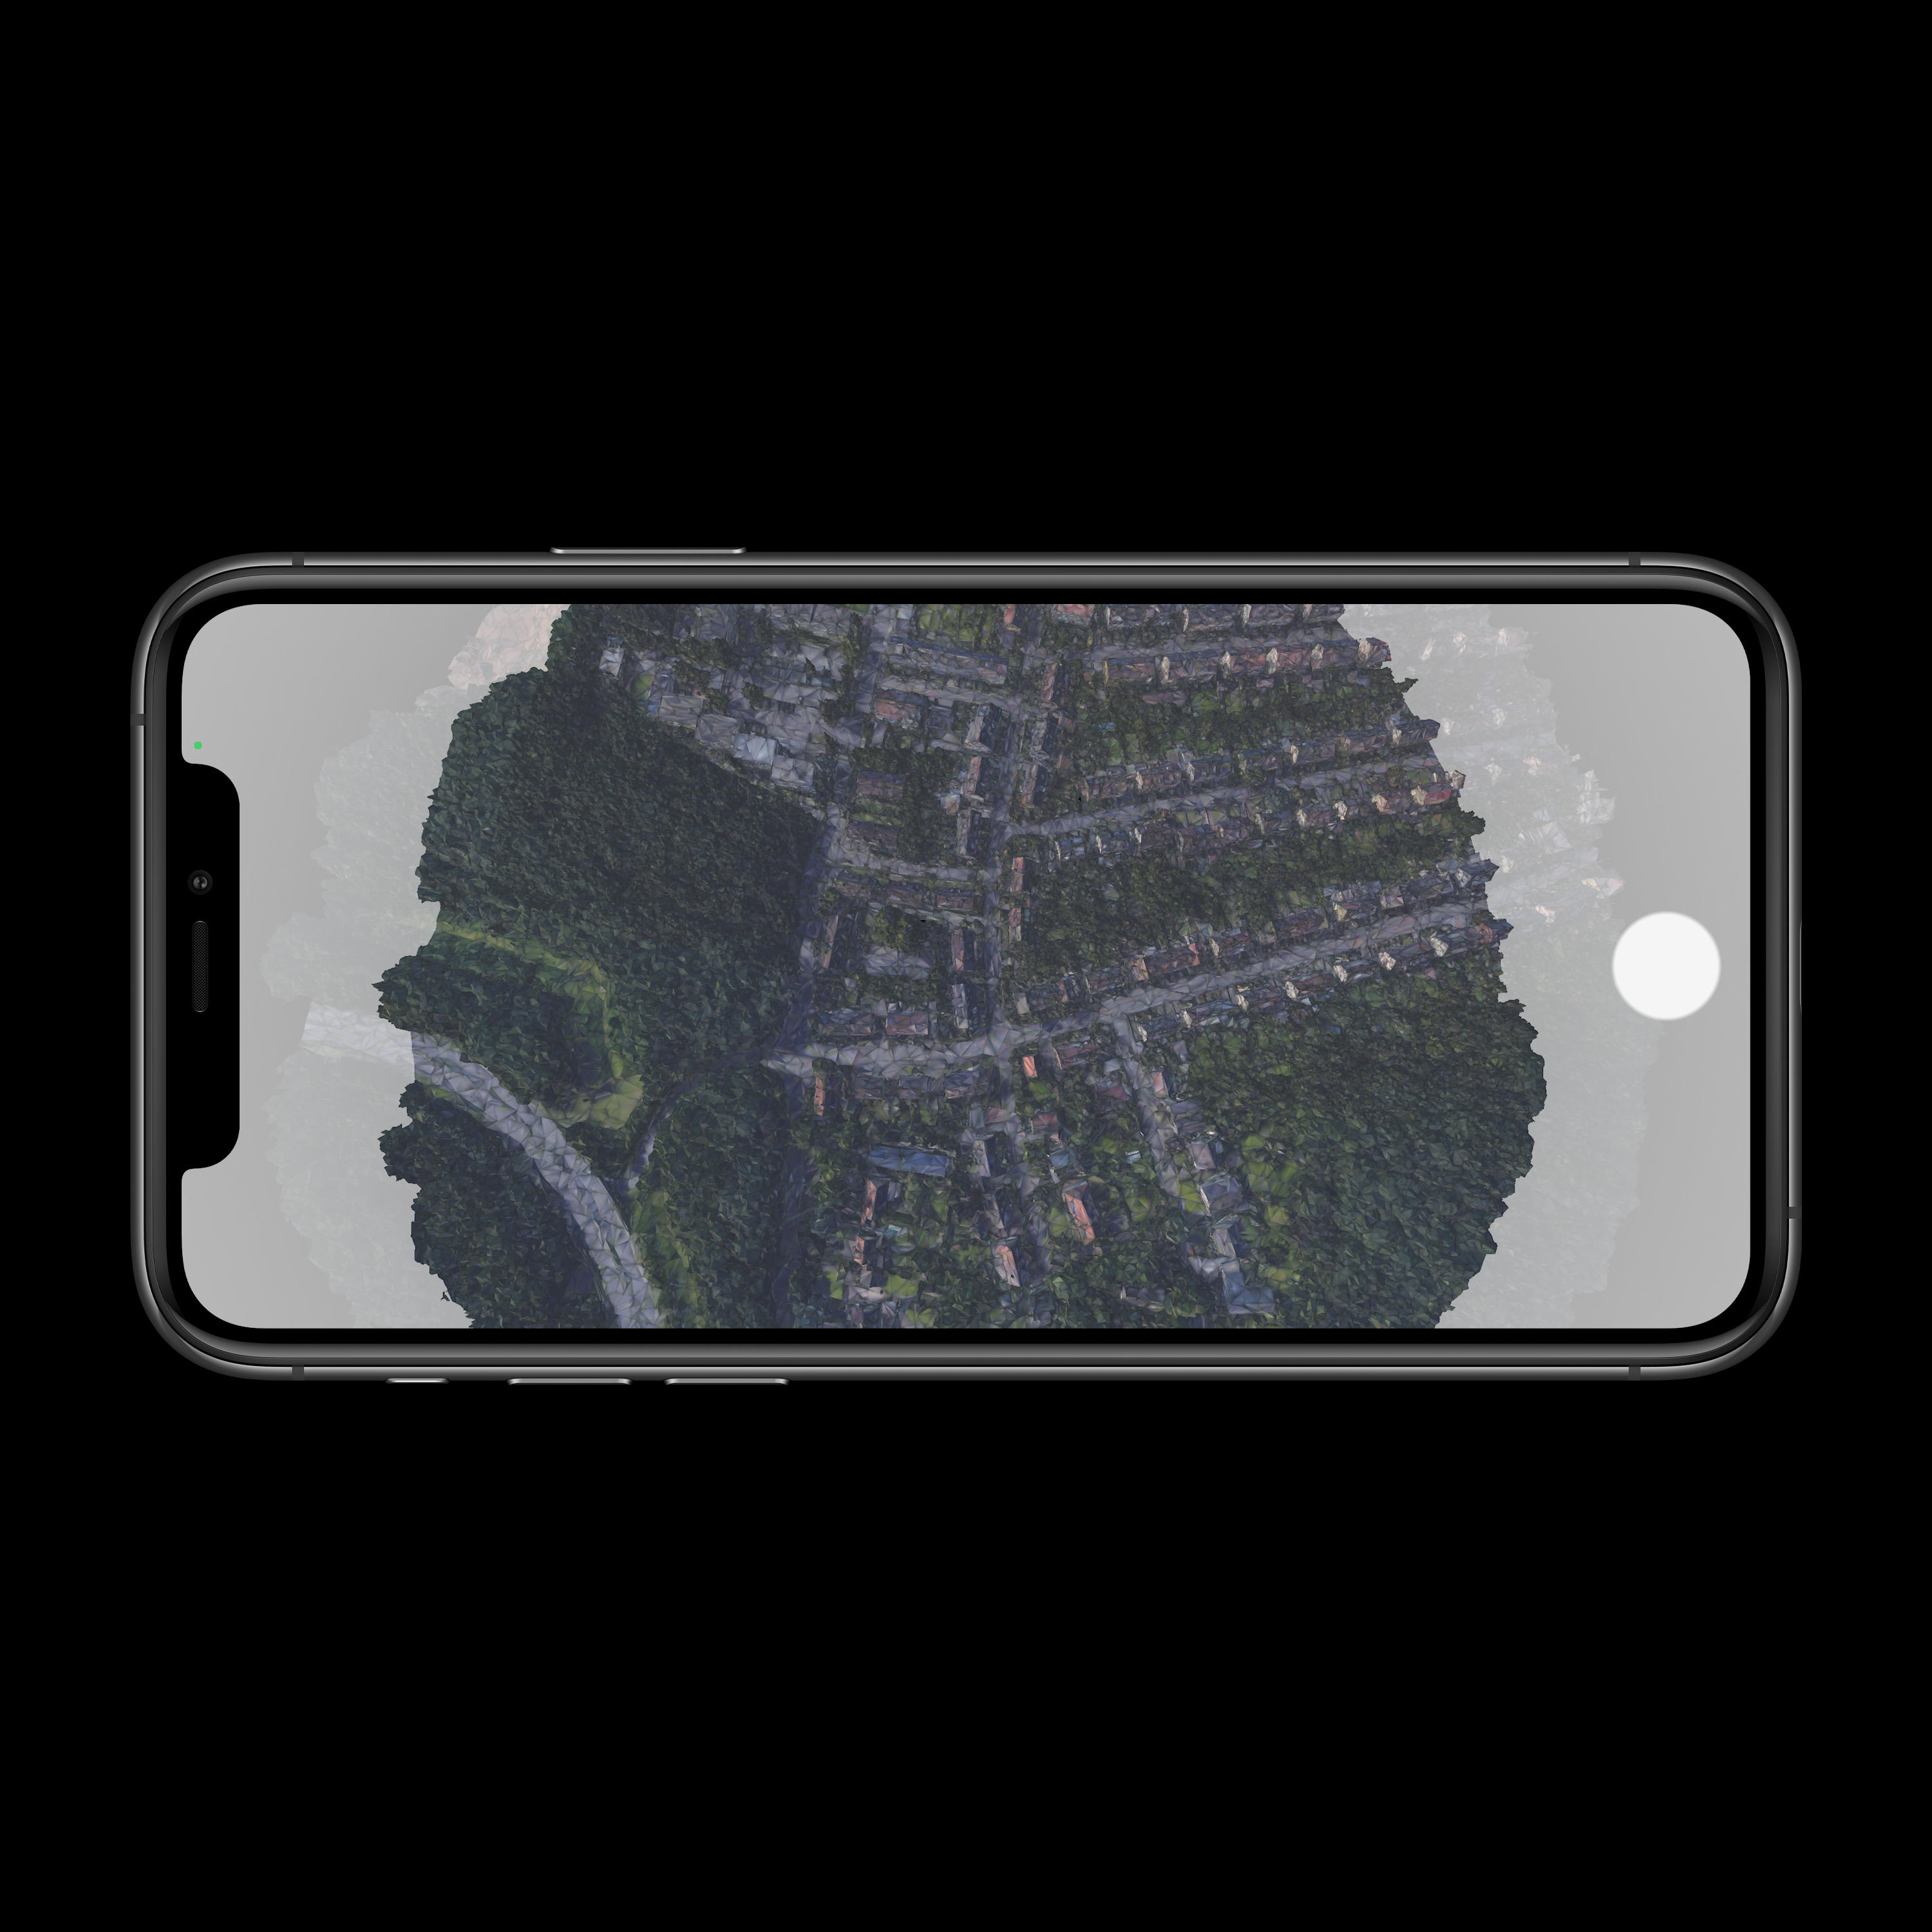 smartphone with circular landscape viewd from the top, disapperaing into fog